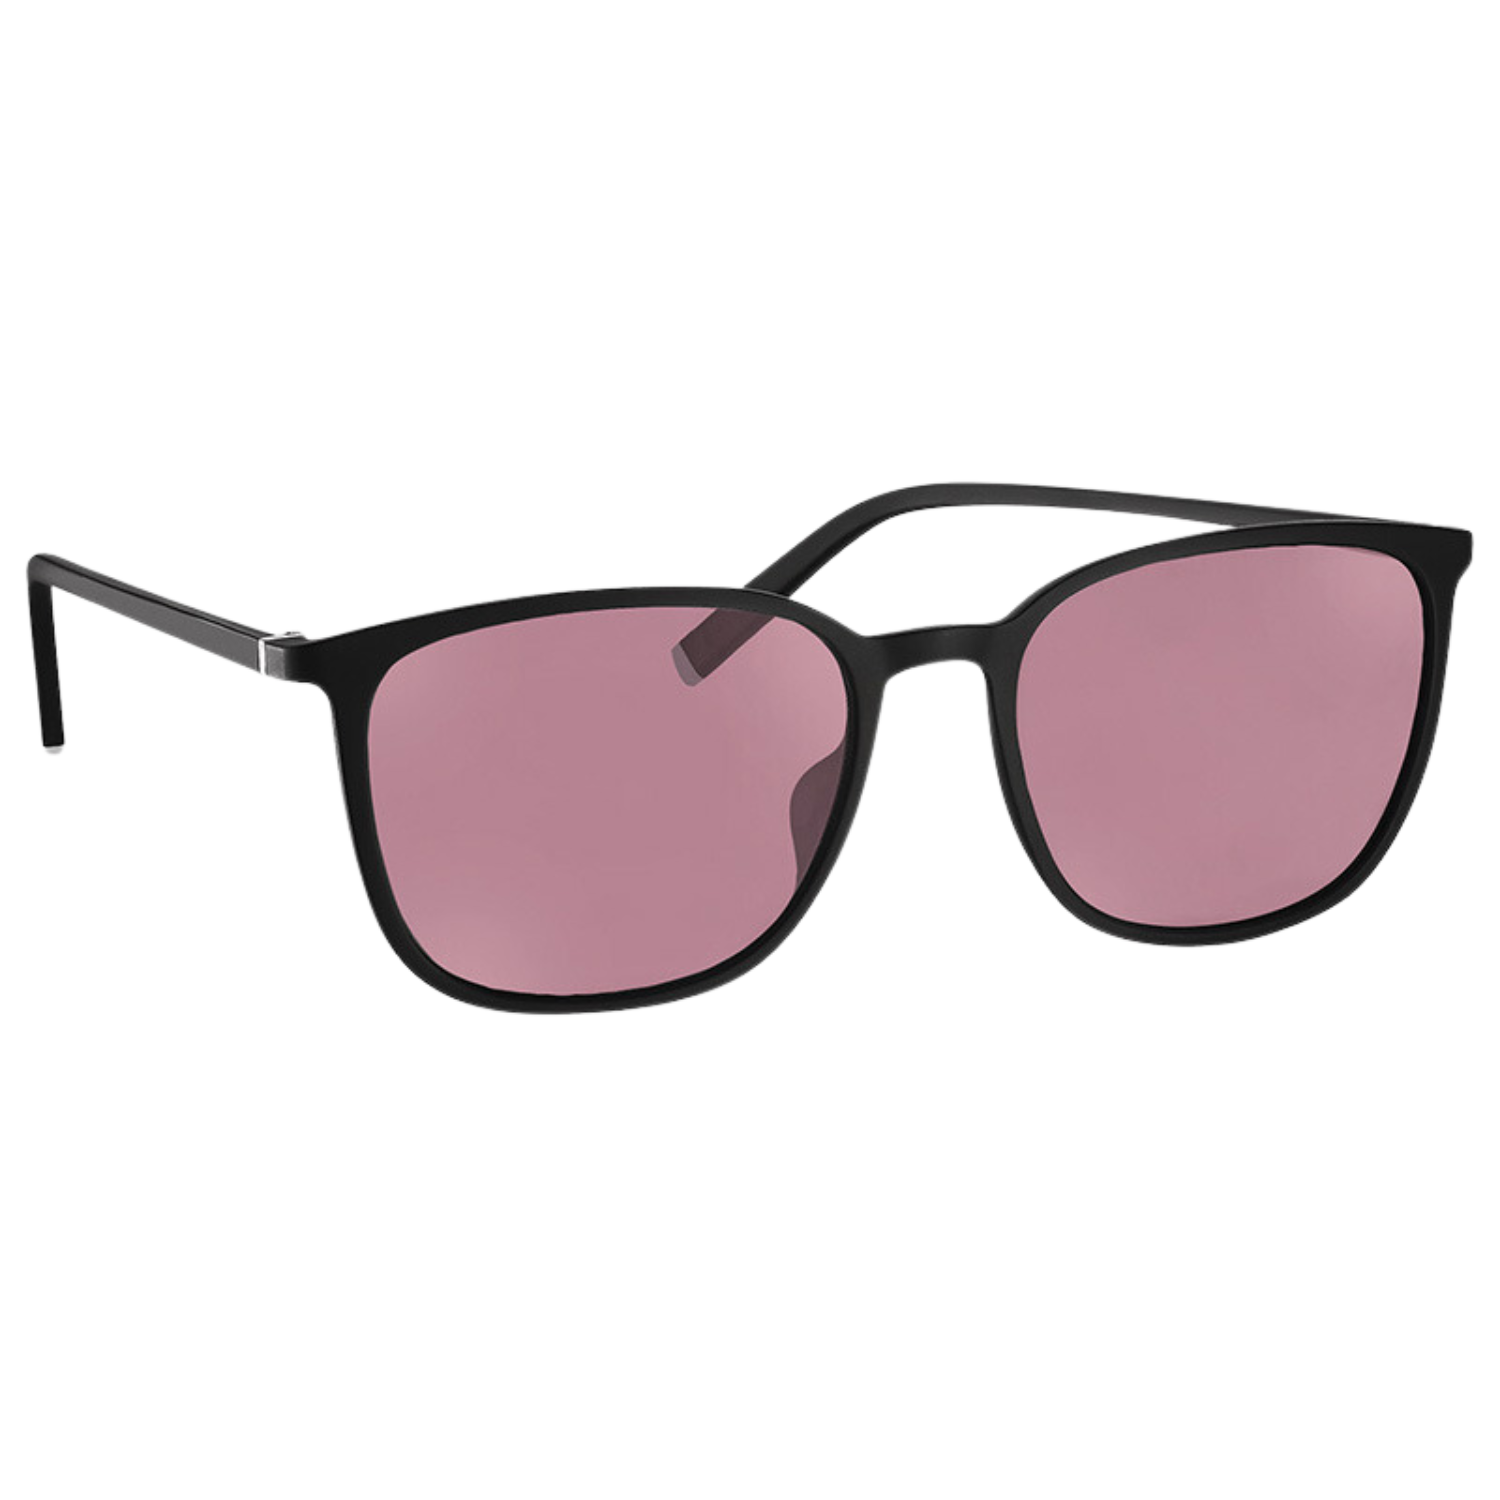 Image of the Acunis FL-41 Light Sensitivity Glasses from Eschenbach with ahtracite acetate frame and 50% light absorption lenses.